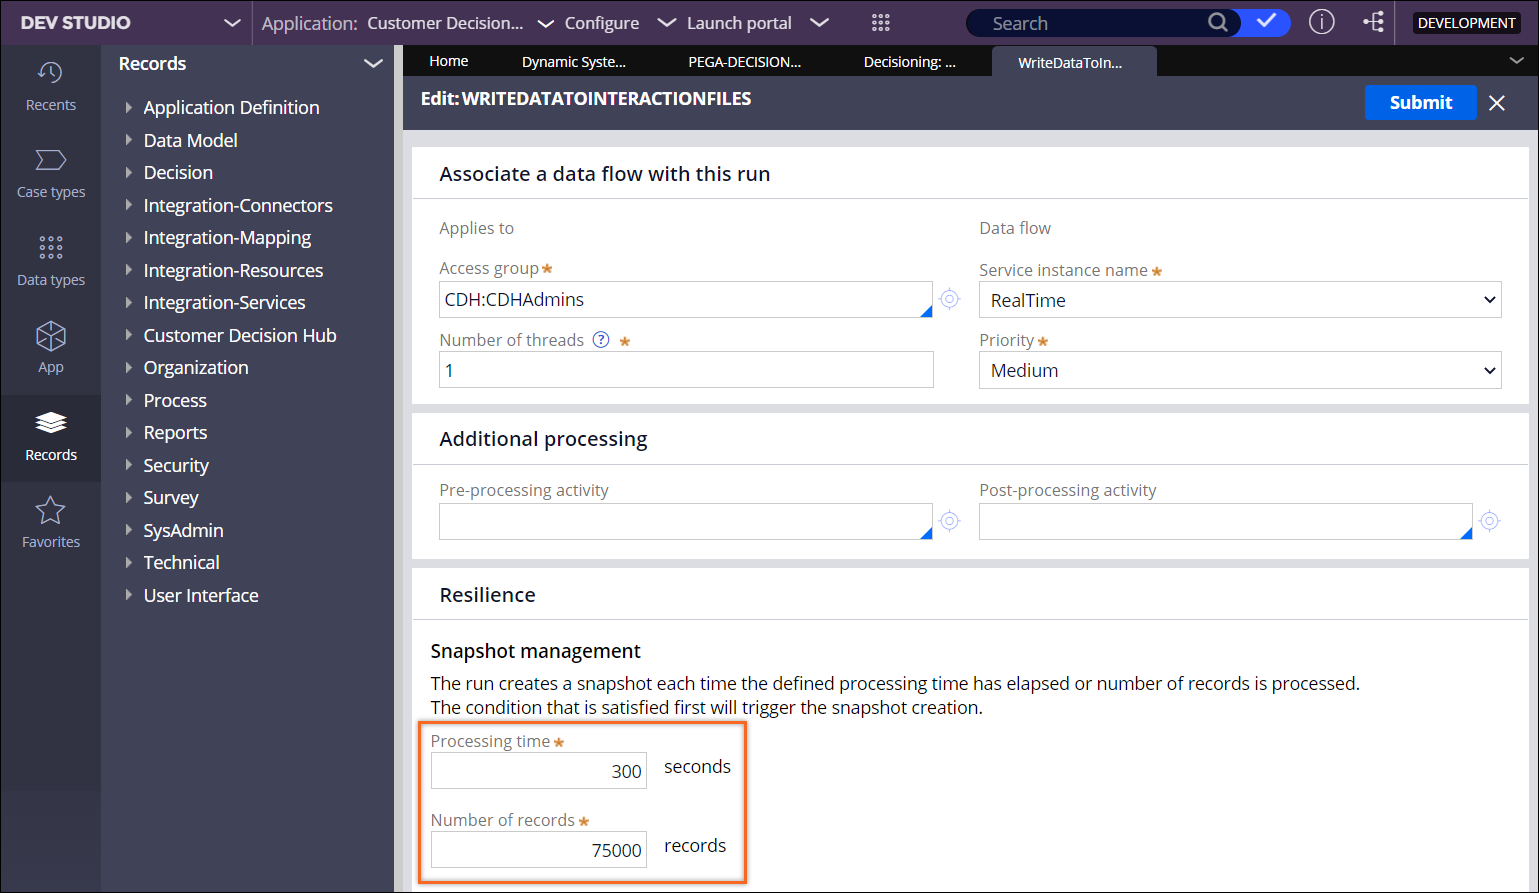 The data flow run for exporting interactions is configured with default snapshot management settings.